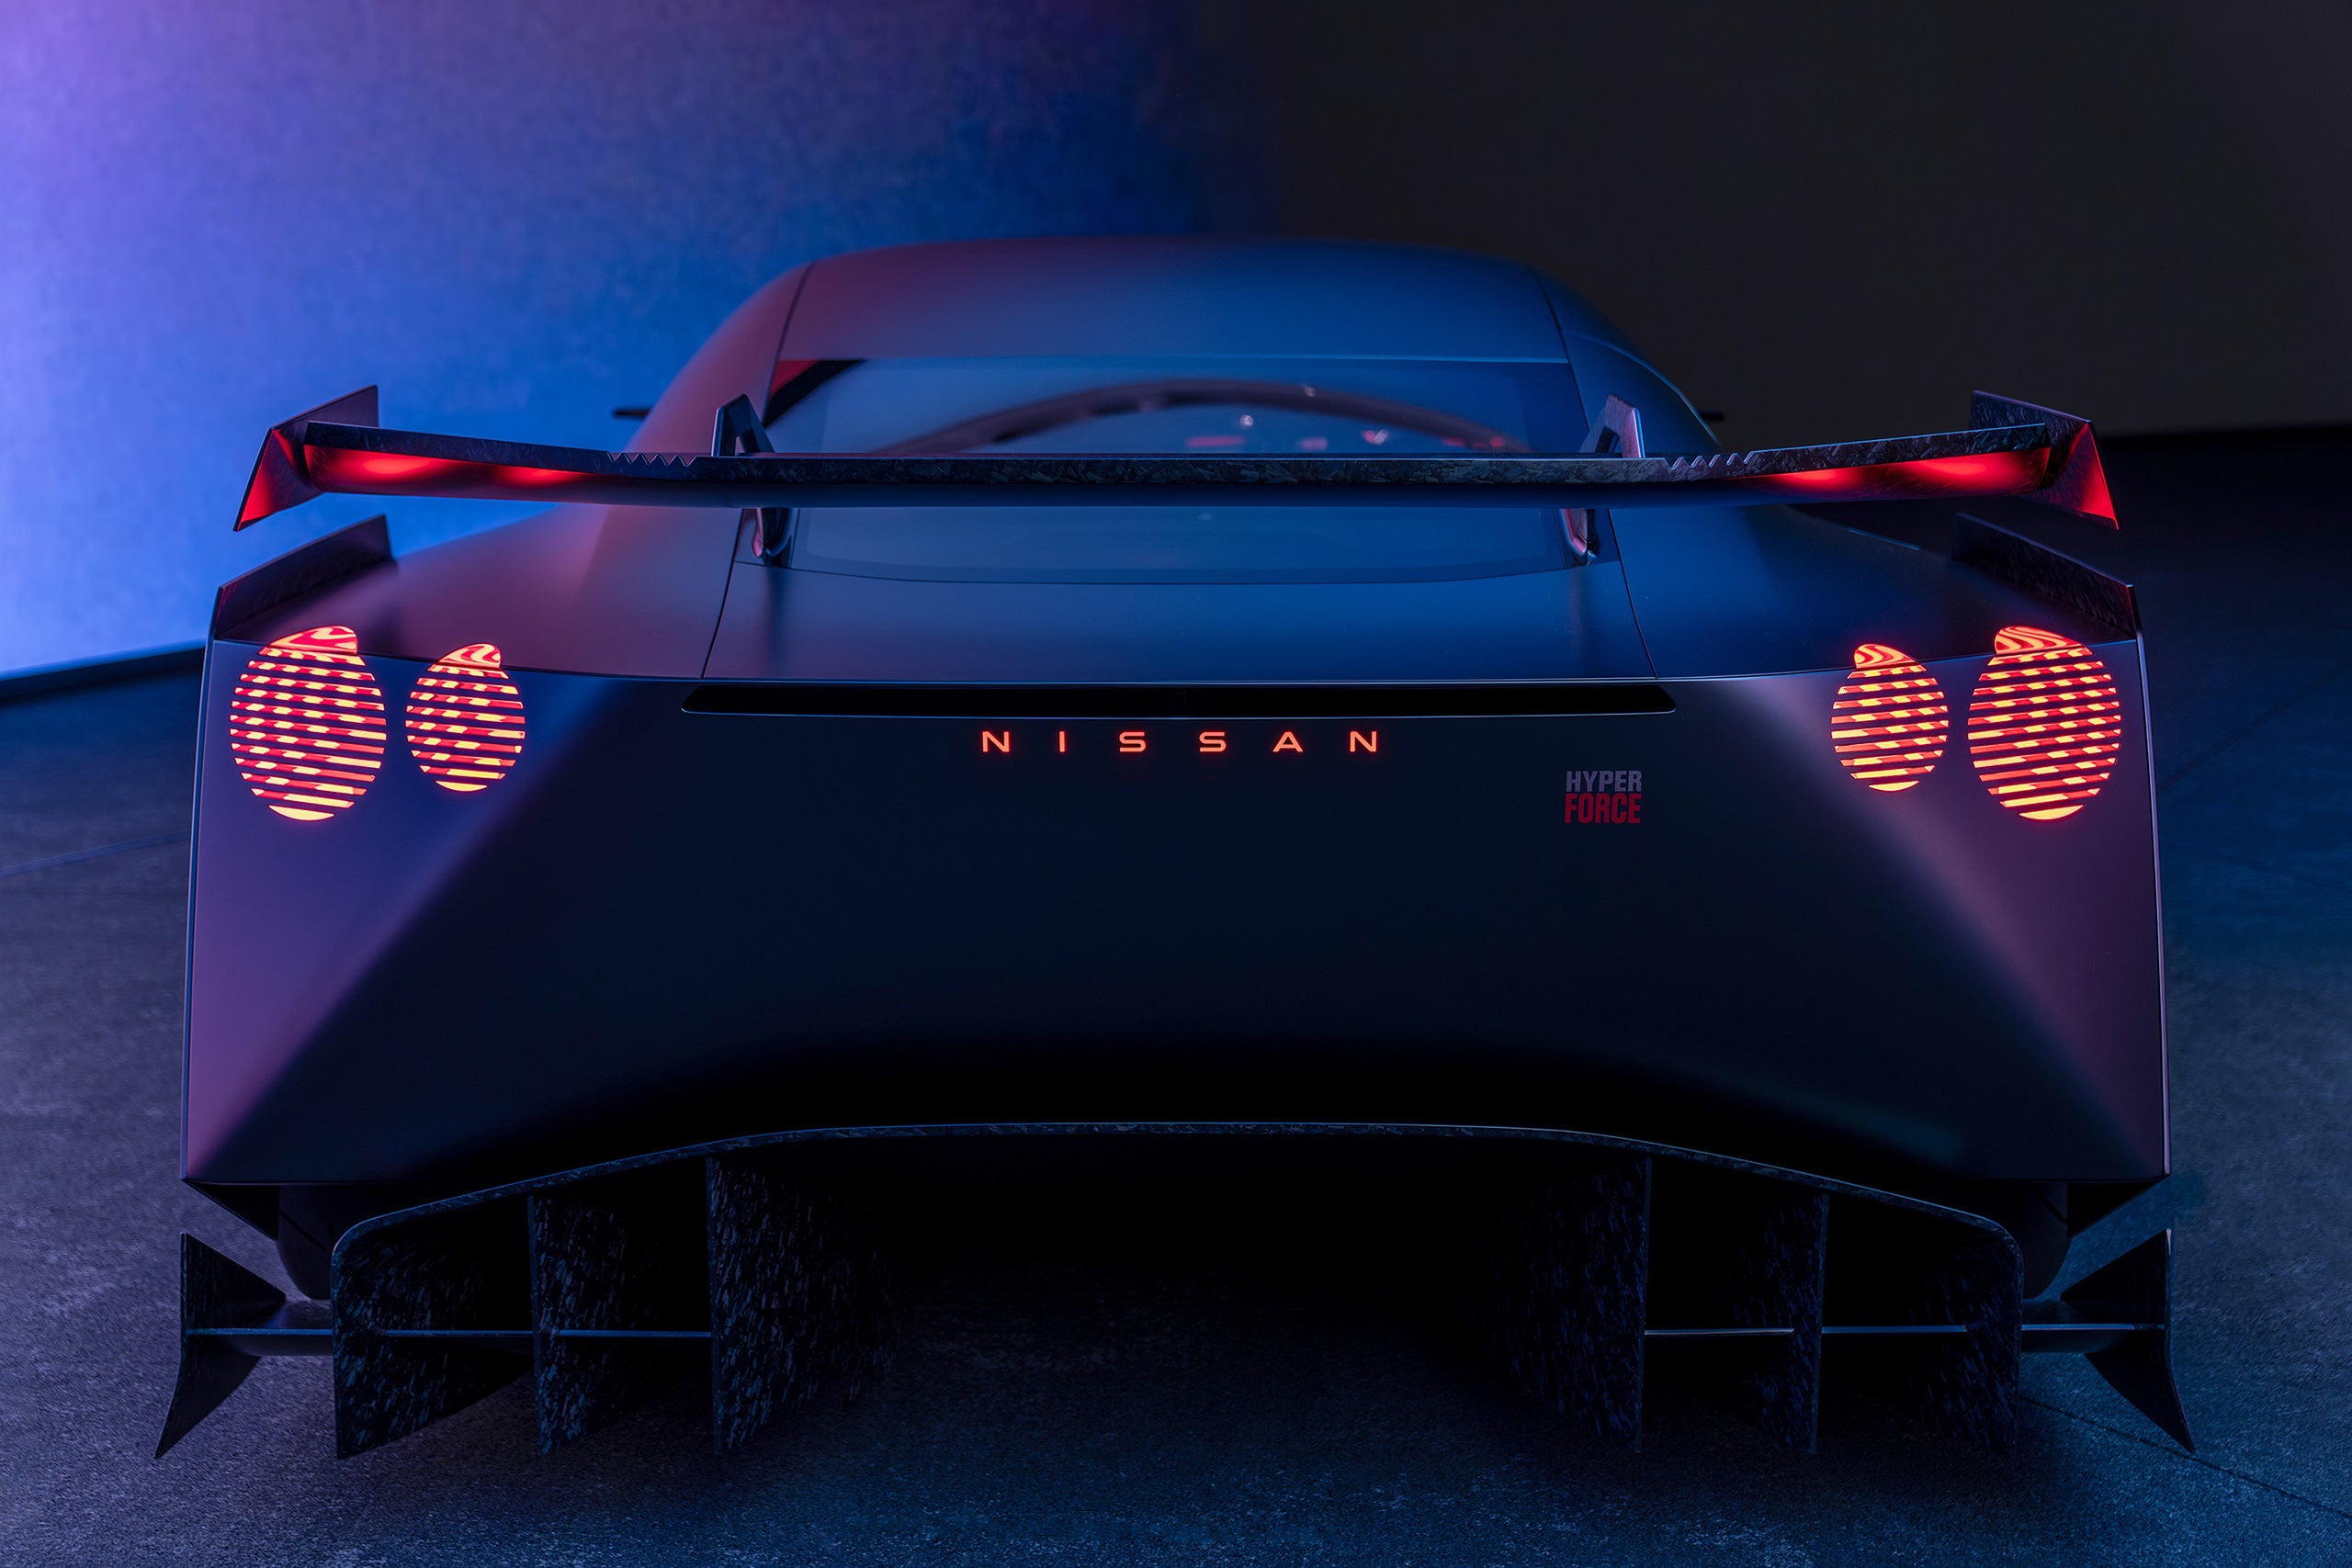 Nissan Gran Turismo Poster Teases New Concept Vehicle